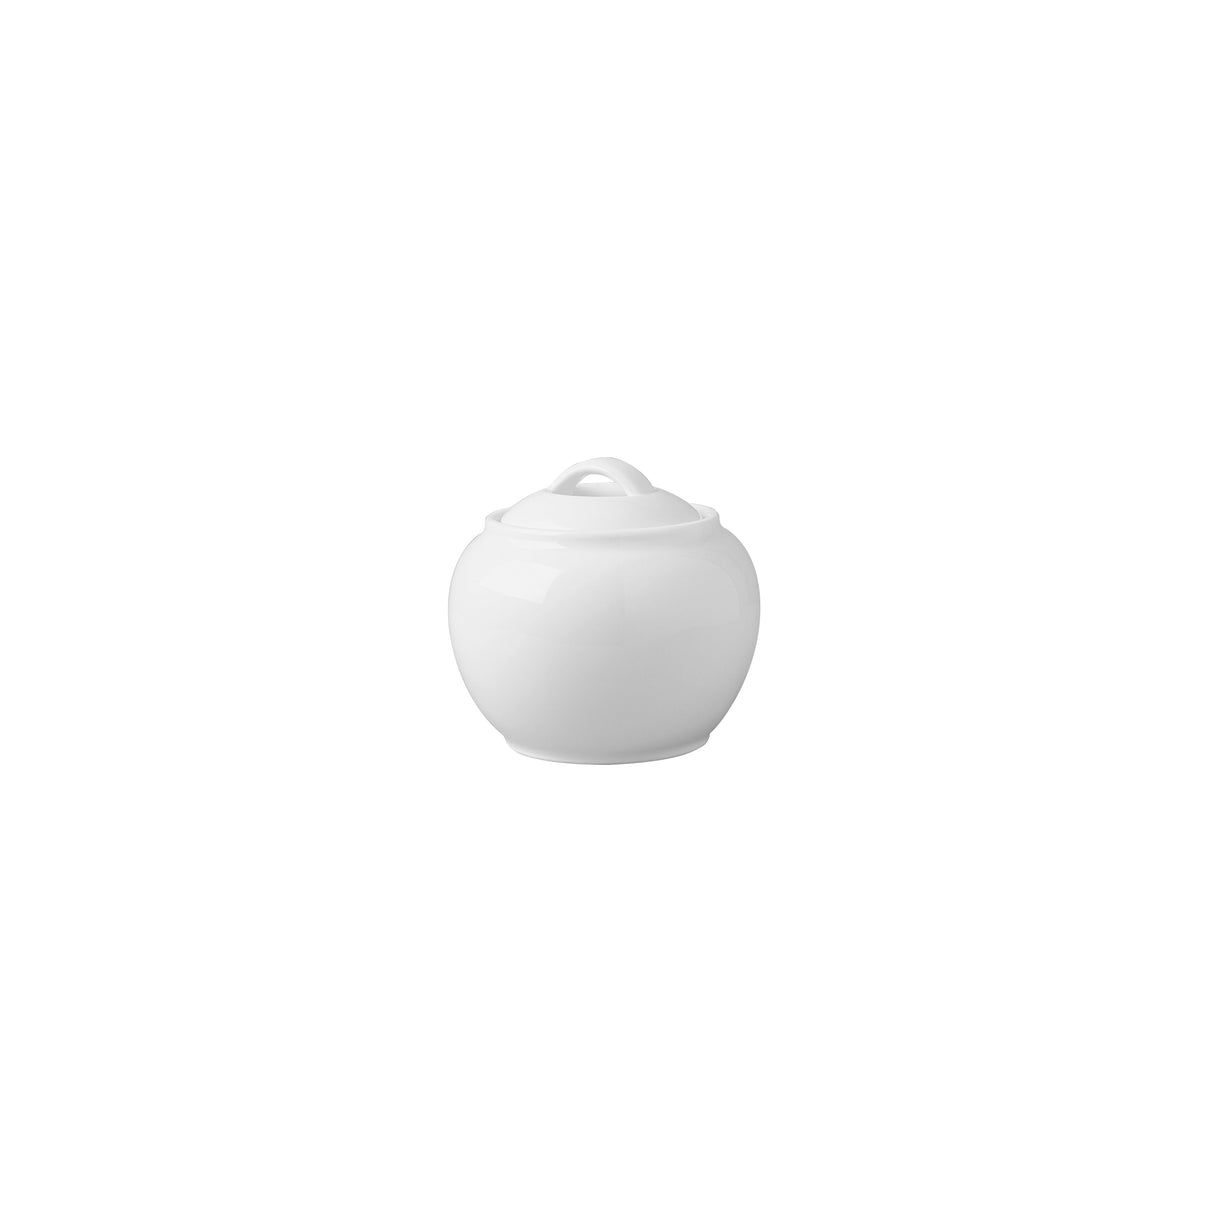 Sugar Bowl Witlid - 300Ml, Prelude from Australia Fine China. made out of Porcelain and sold in boxes of 12. Hospitality quality at wholesale price with The Flying Fork! 